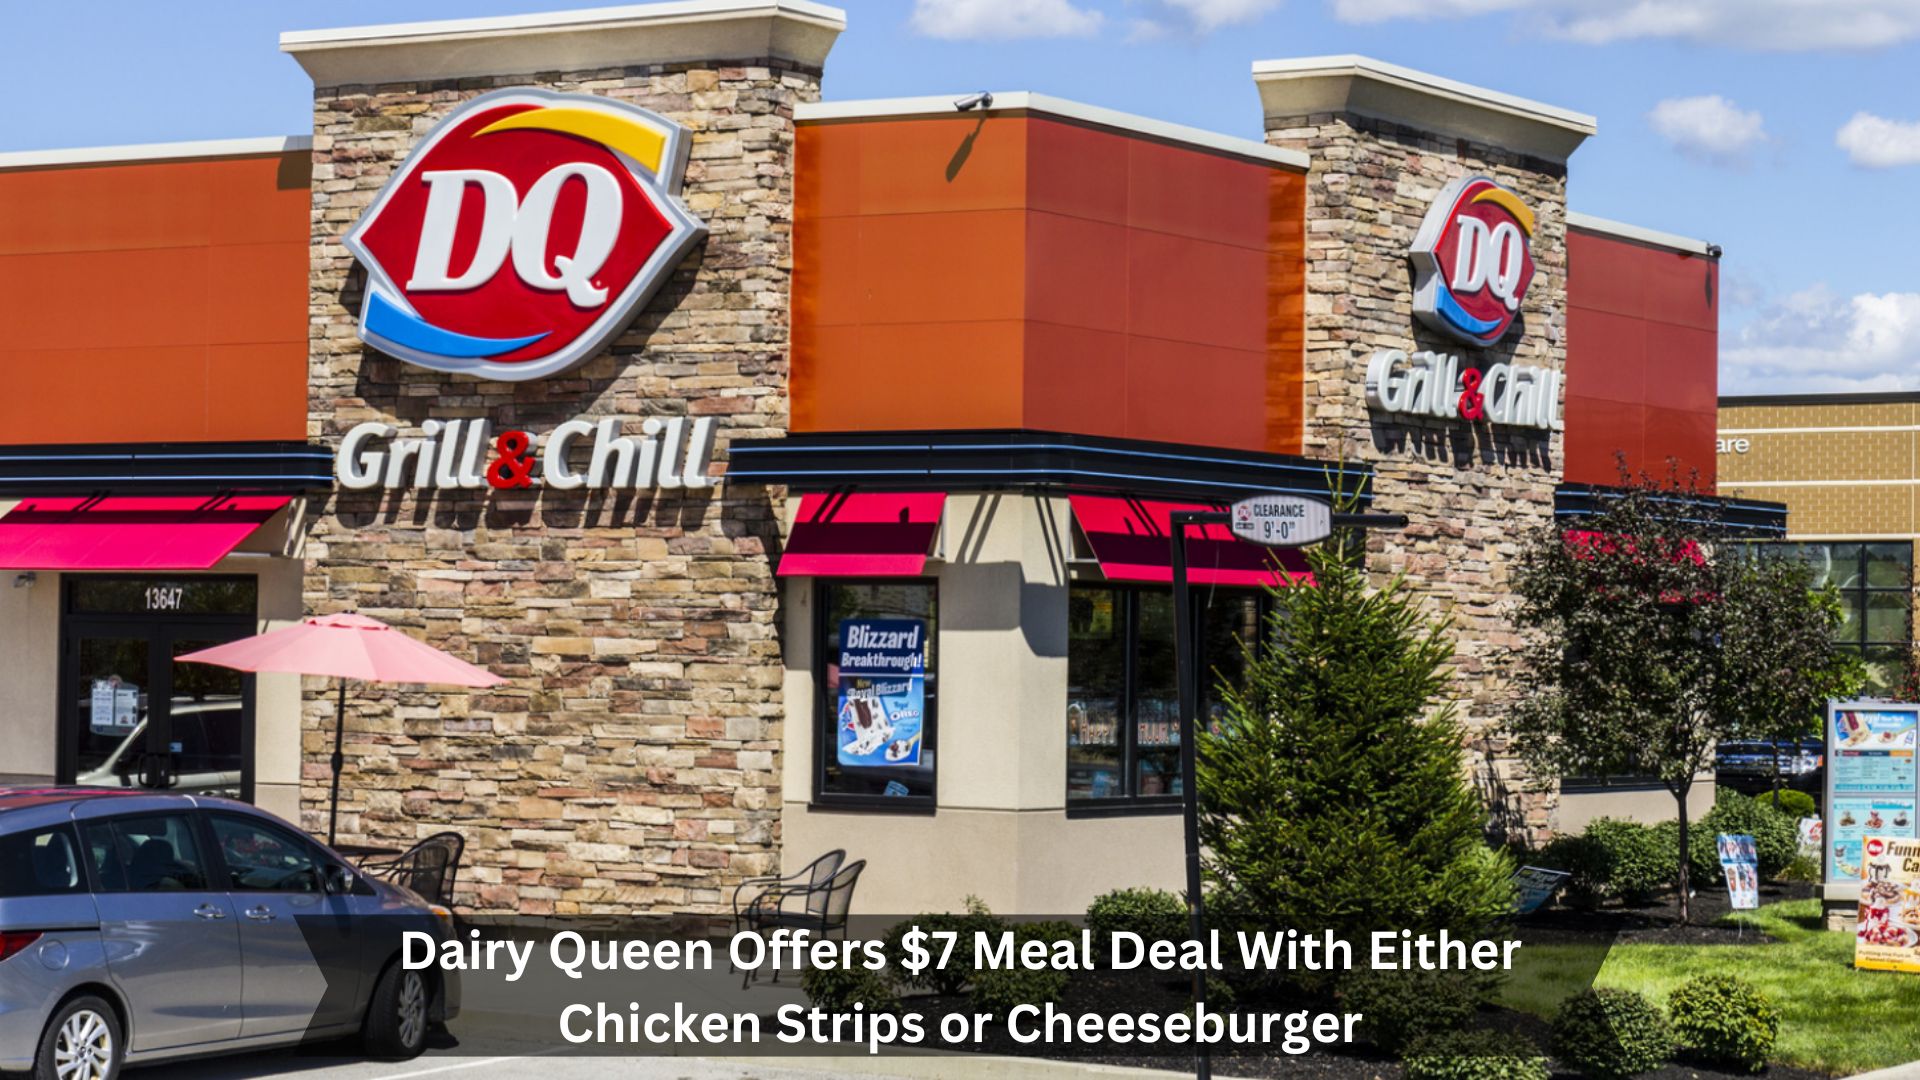 Dairy-Queen-Offers-7-Meal-Deal-With-Either-Chicken-Strips-or-Cheeseburger